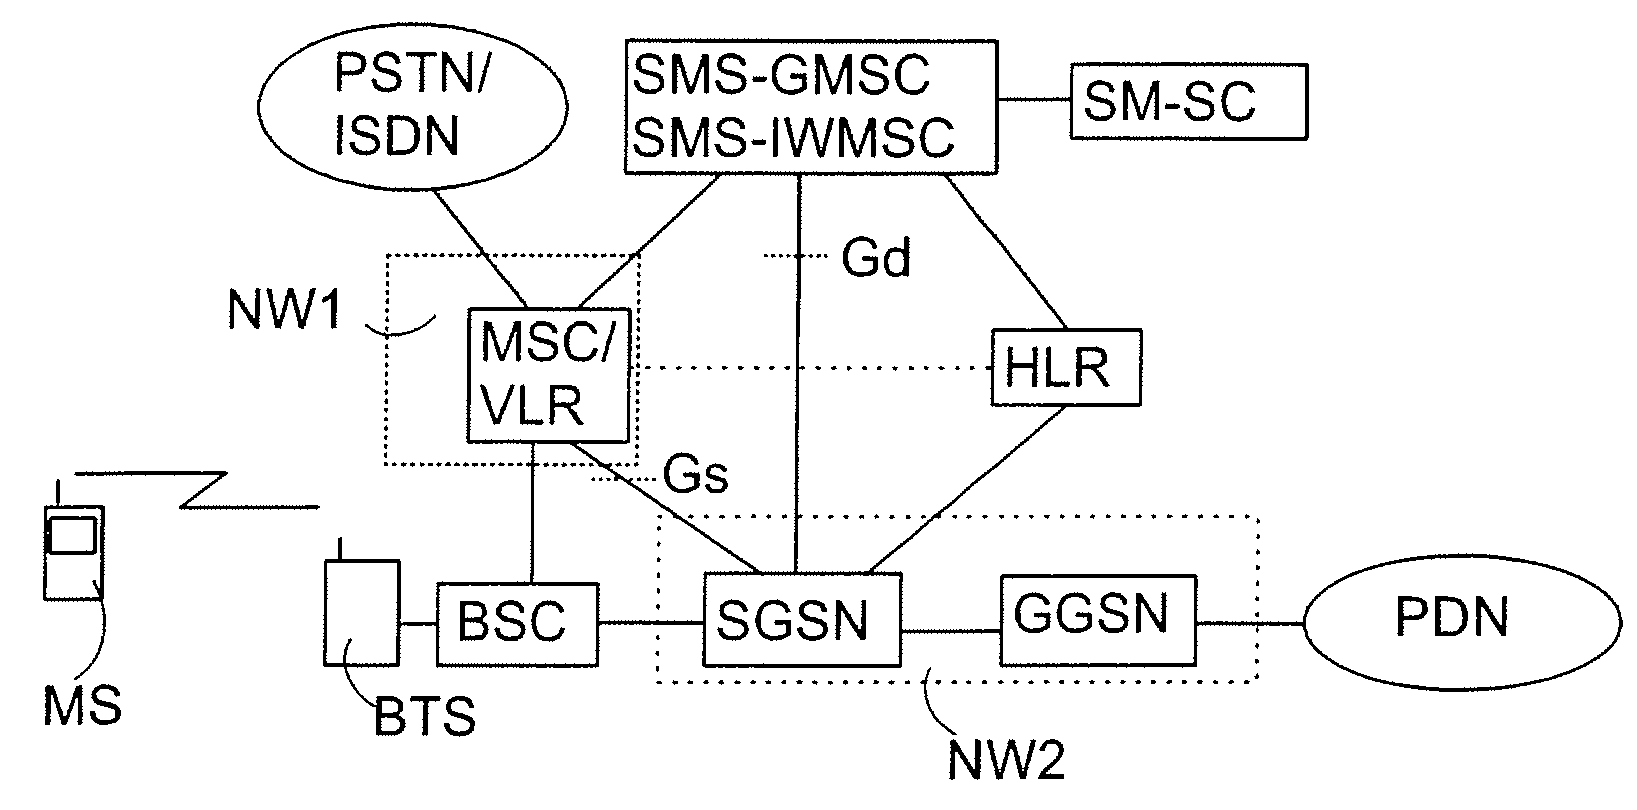 Transmitting messages in telecommunications system comprising a packet radio network